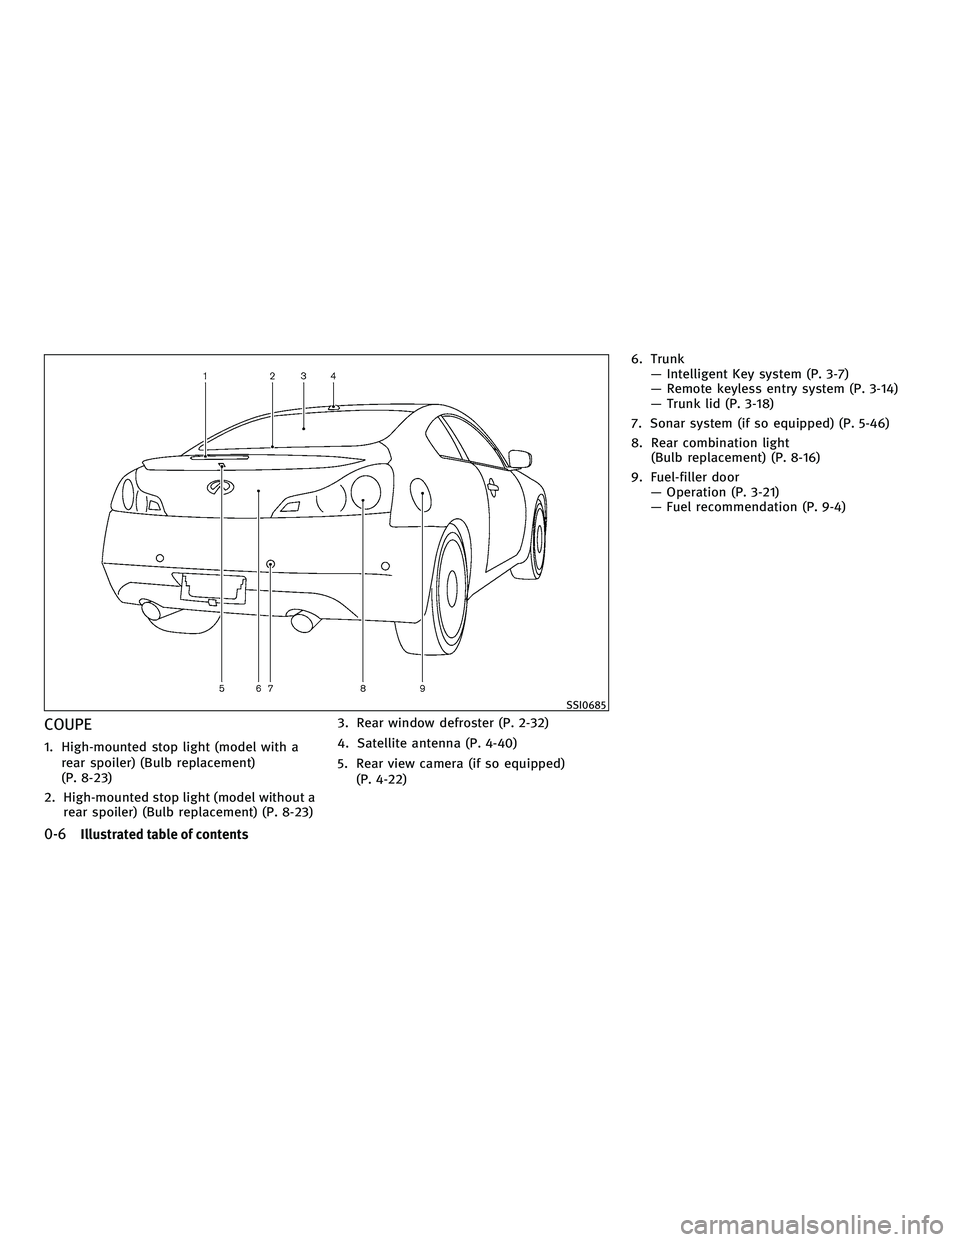 INFINITI G-COUPE 2010  Owners Manual COUPE
1. High-mounted stop light (model with arear spoiler) (Bulb replacement)
(P. 8-23)
2. High-mounted stop light (model without a rear spoiler) (Bulb replacement) (P. 8-23) 3. Rear window defroster